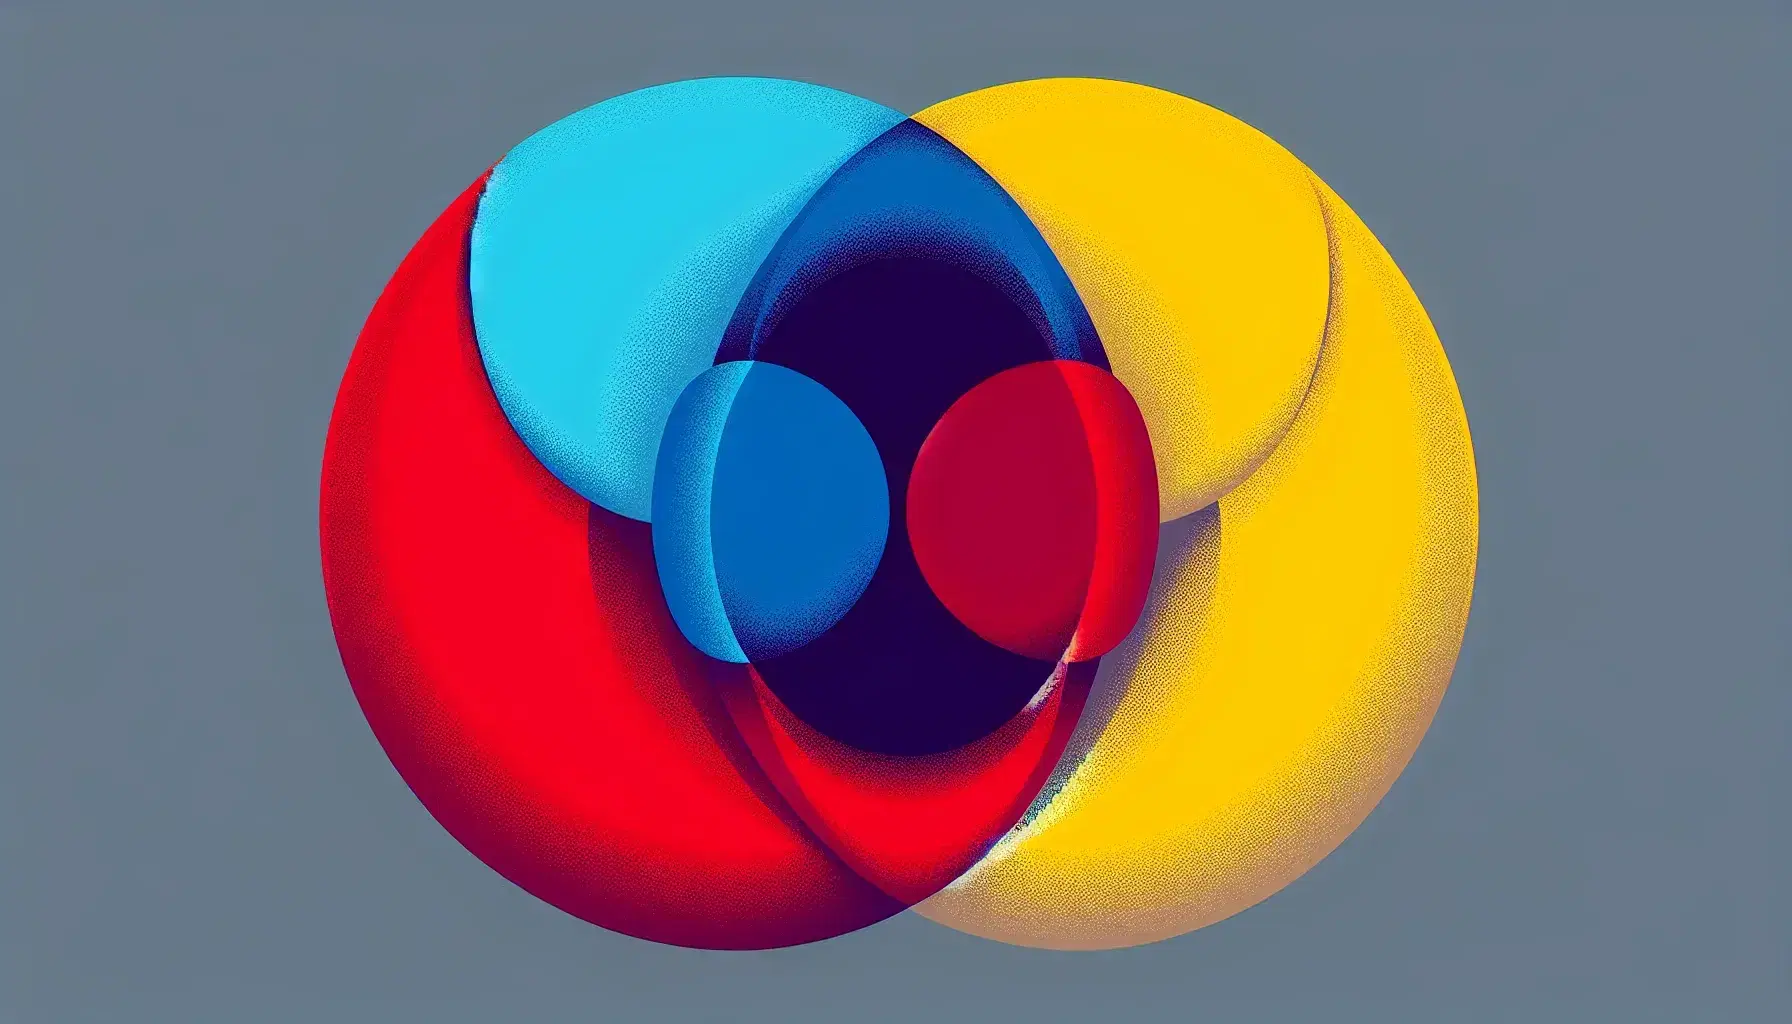 Three overlapping circles in red, blue and yellow on a light gray background with intersecting areas creating purple, green and orange, and brown in the center.